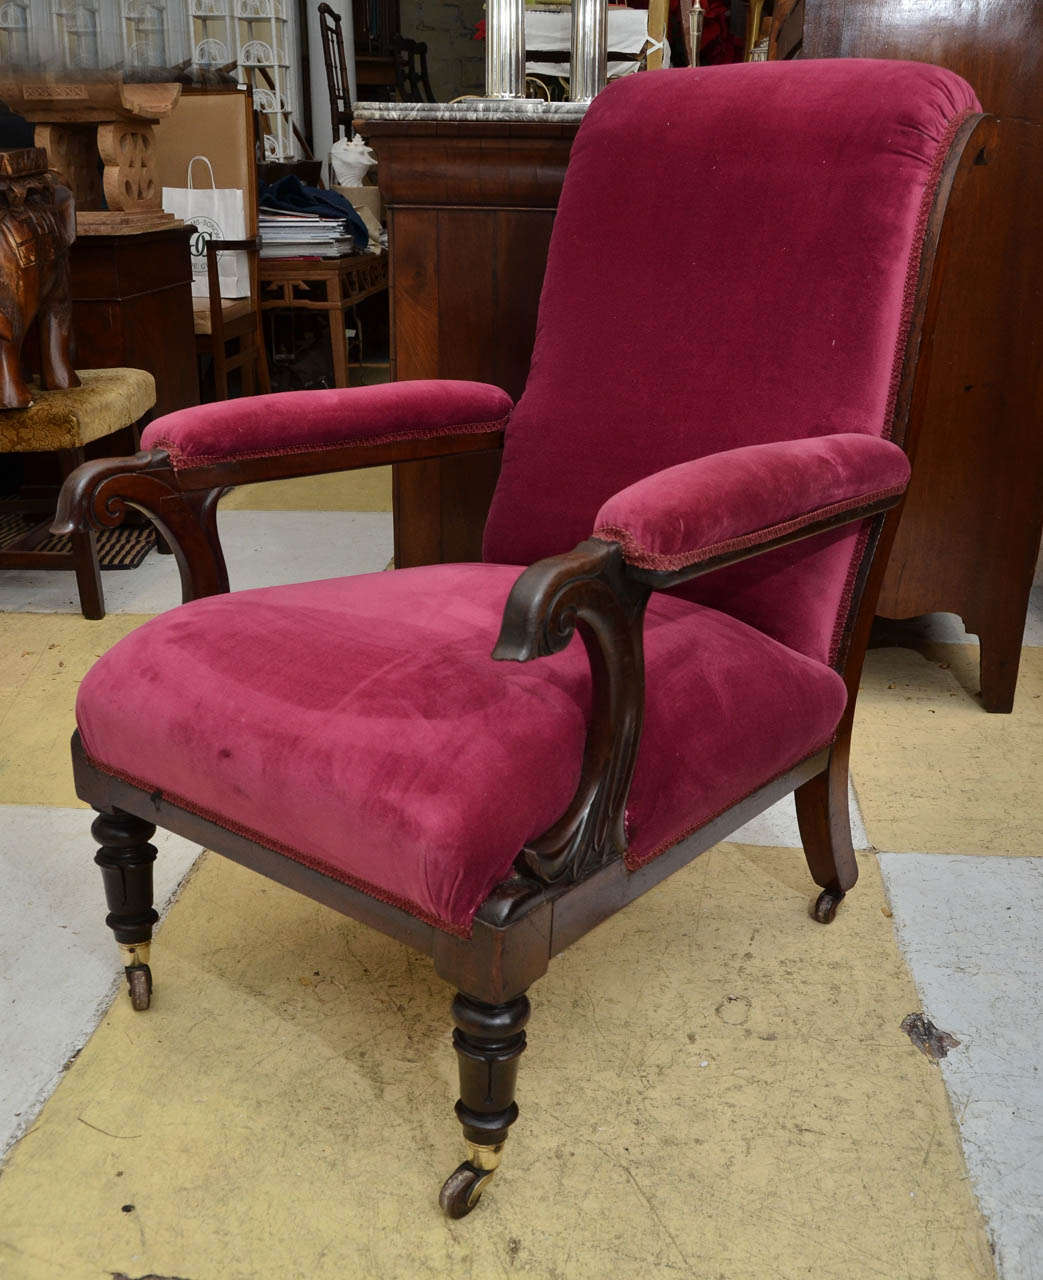 English mahogany framed open armchair with leaf scroll carved arm supports with upholstered arm rests. Front legs with upturned lappet carving. Front legs with cup castors signed Cope & Collinson Patent.  Late Regency early William IV, 1830-40.